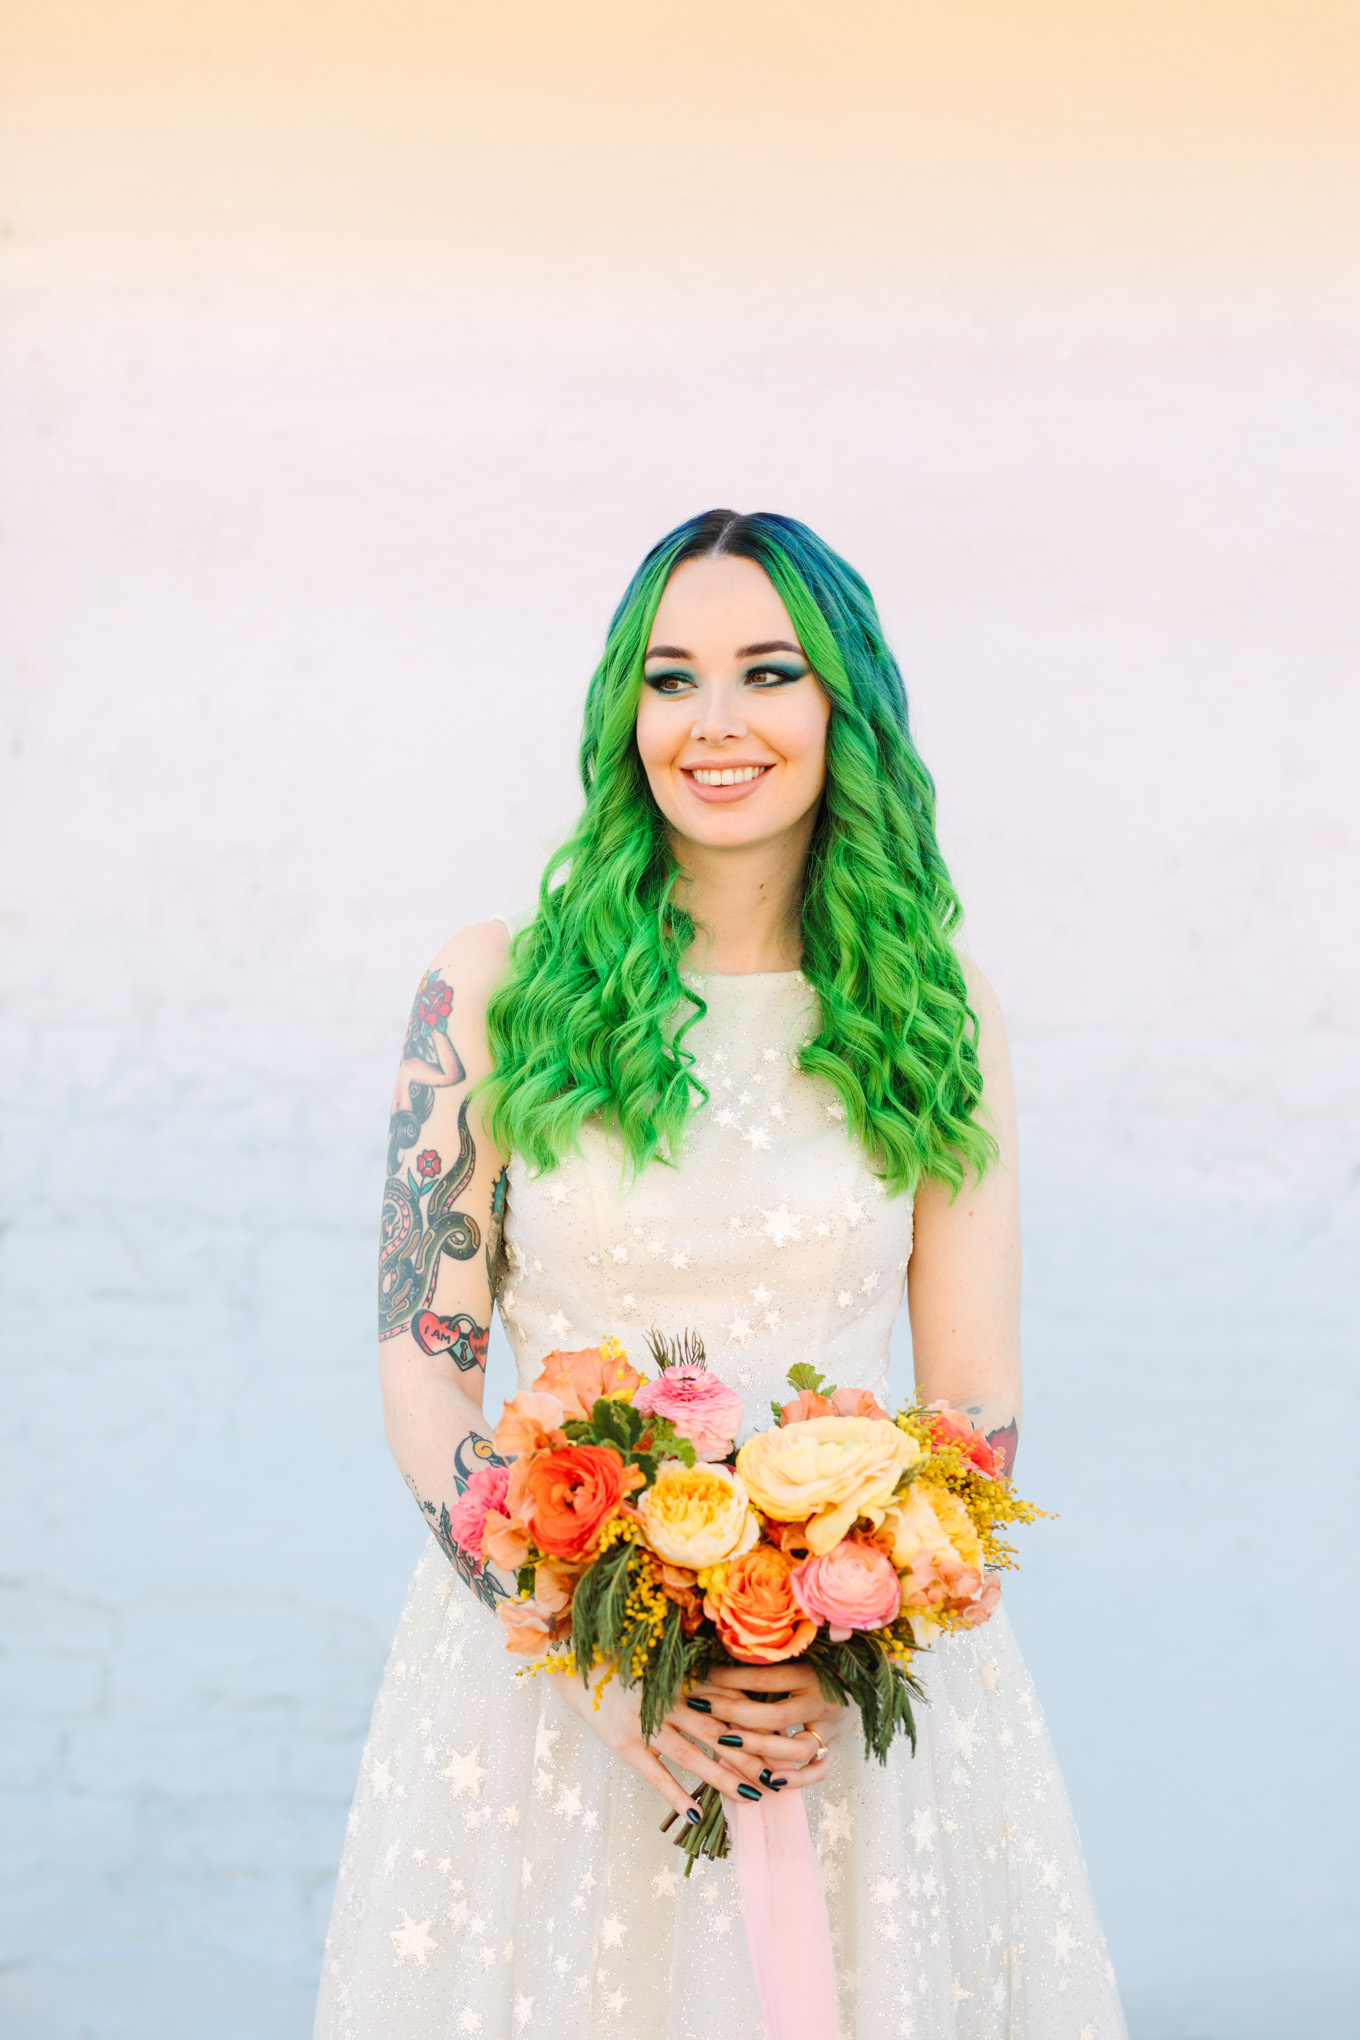 Bride with neon green hair | Colorful wedding at The Unique Space Los Angeles published in The Knot Magazine | Fresh and colorful photography for fun-loving couples in Southern California | #colorfulwedding #losangeleswedding #weddingphotography #uniquespace Source: Mary Costa Photography | Los Angeles